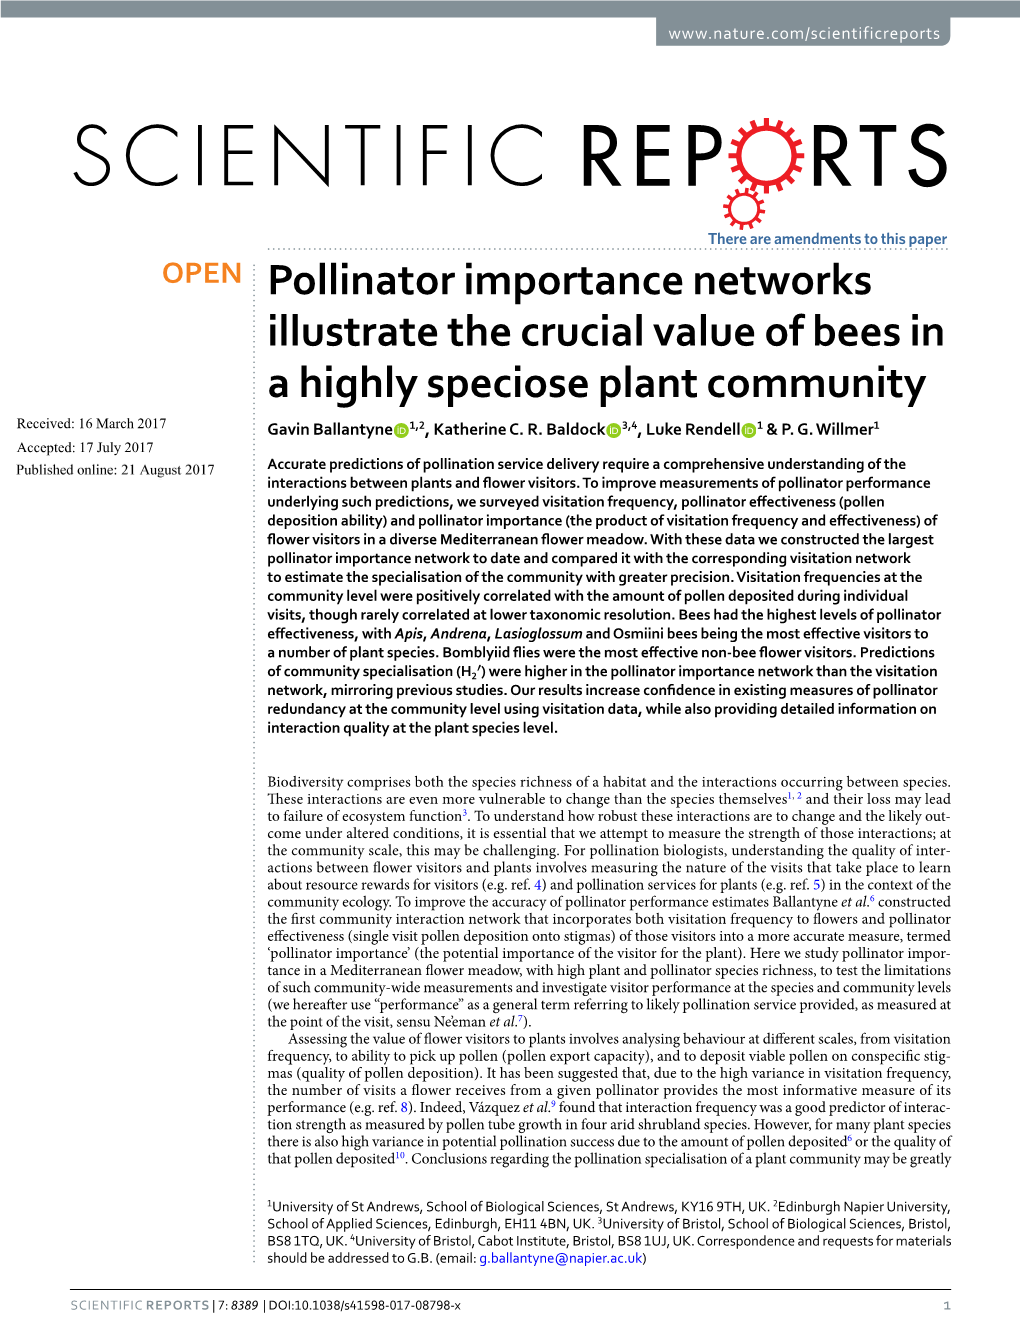 Pollinator Importance Networks Illustrate the Crucial Value of Bees in a Highly Speciose Plant Community Received: 16 March 2017 Gavin Ballantyne 1,2, Katherine C